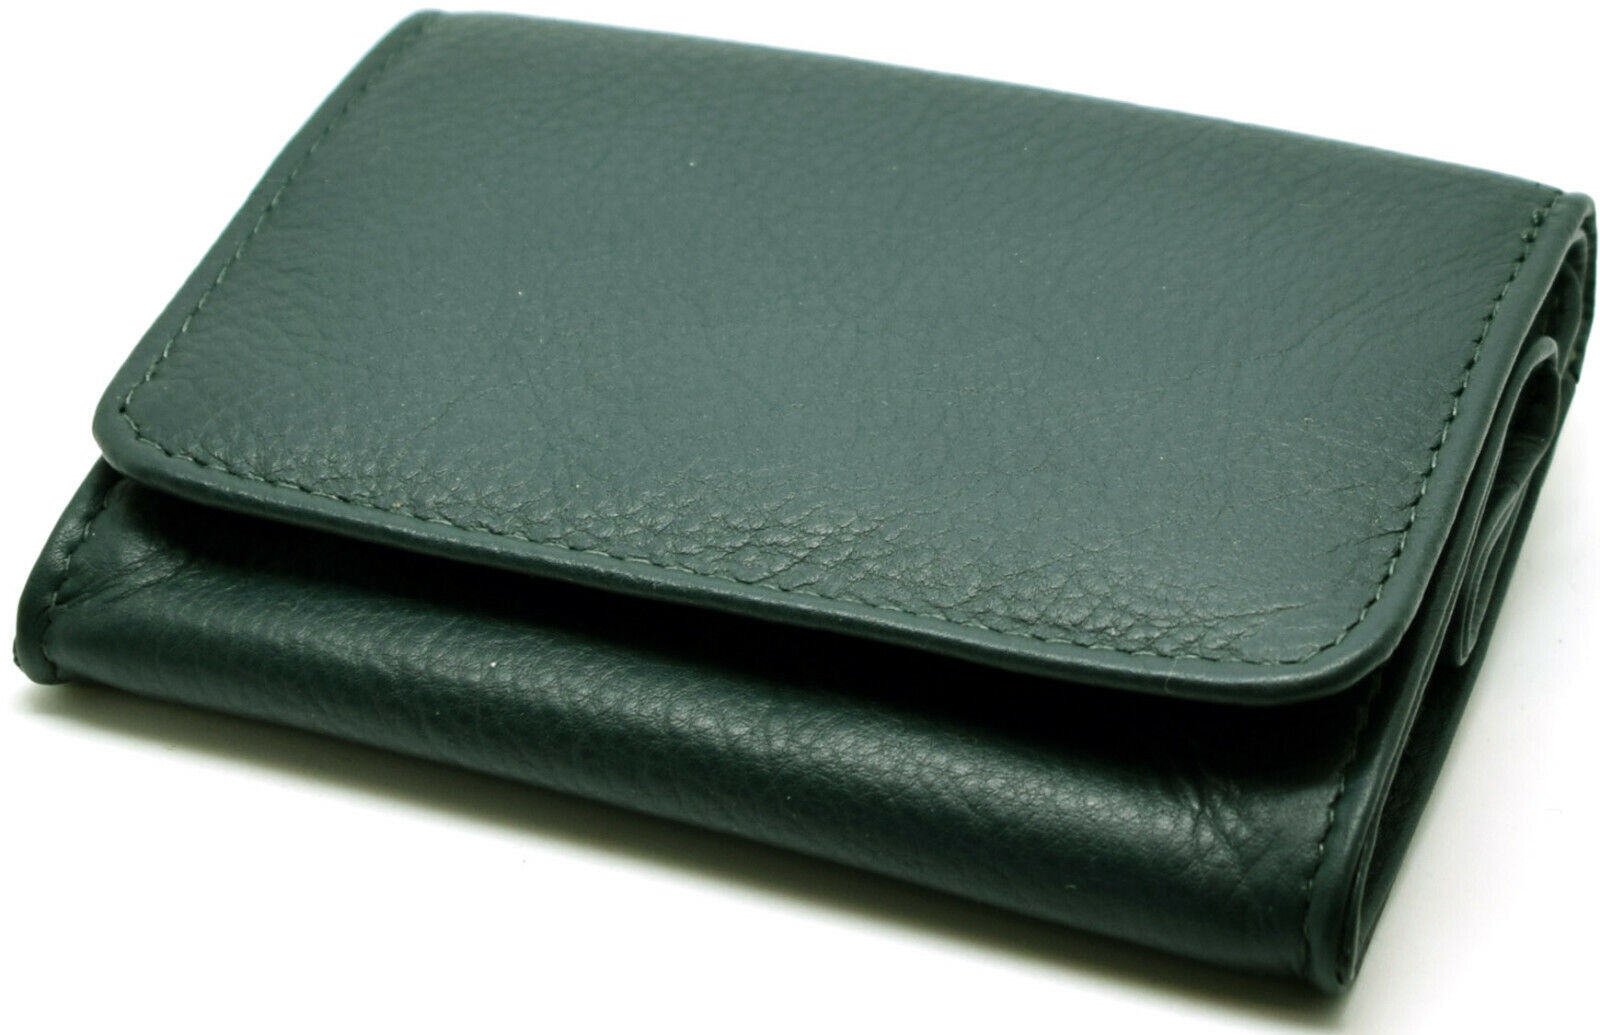 Peterson Avoca Stand Up 'Box' Tobacco Pouch (146)